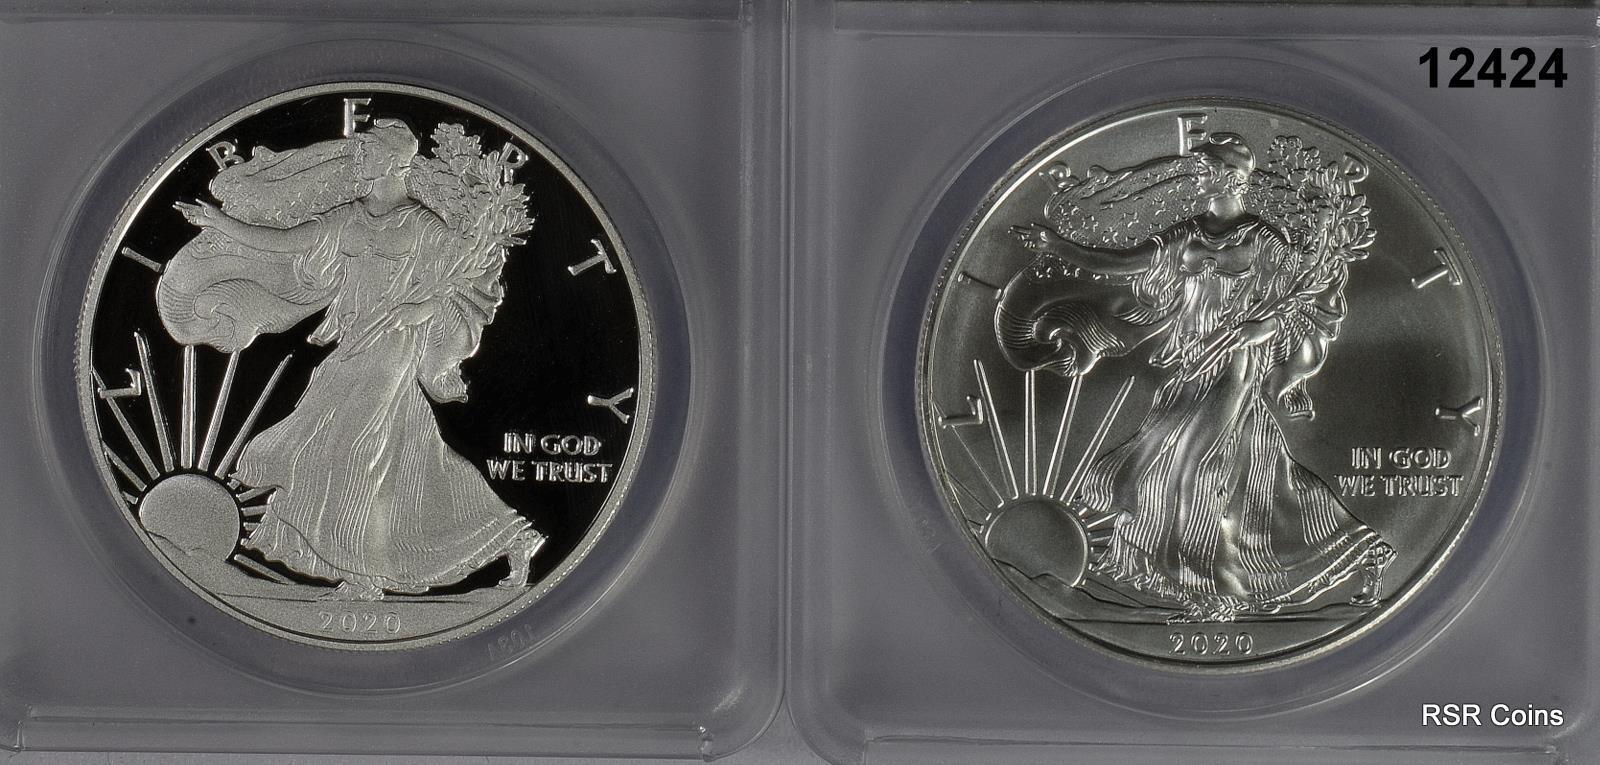 2020 W & P SILVER EAGLE 2 COIN SET ANACS CERTIFIED PR70 & MS70 PERFECT! #12424